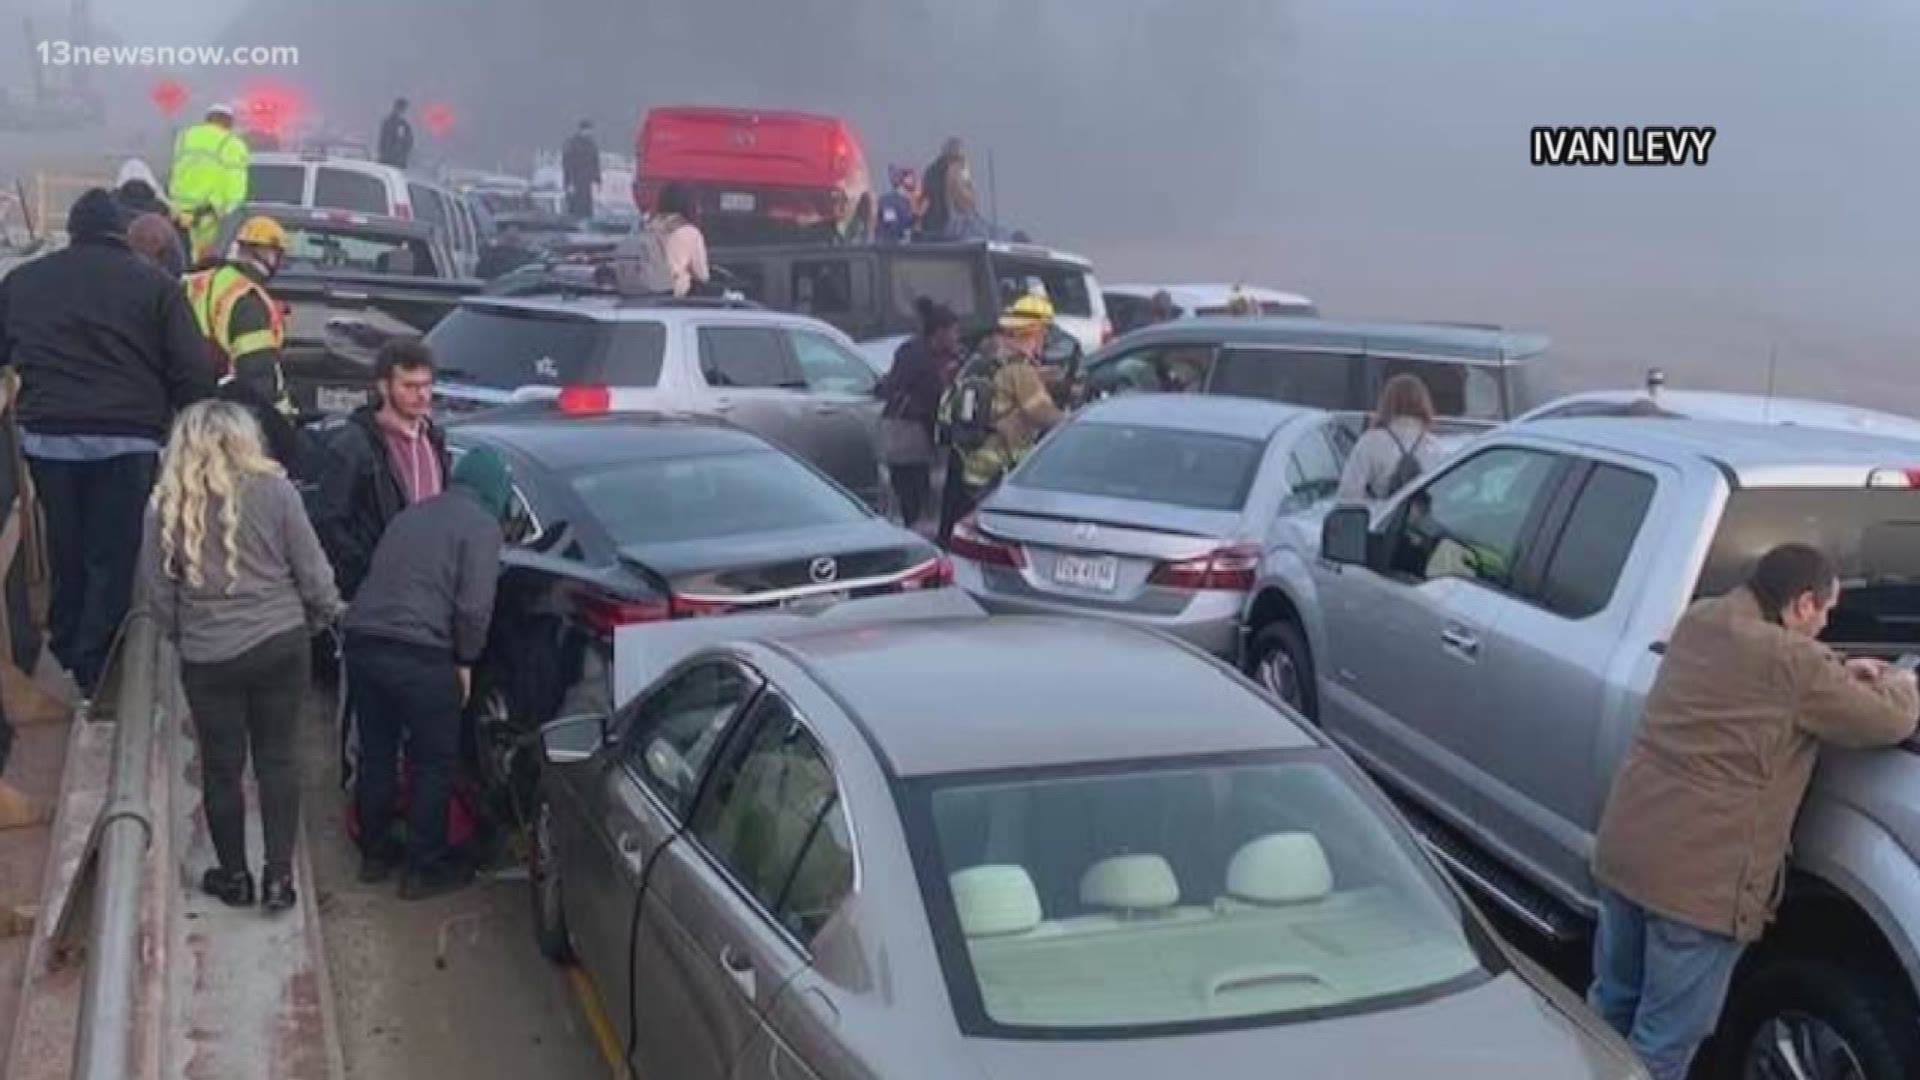 Heavy fog and icy conditions were all factors in a 69-vehicle pileup on I-64 in York County. 13News Now Ali Weatherton spoke to a few witnesses.